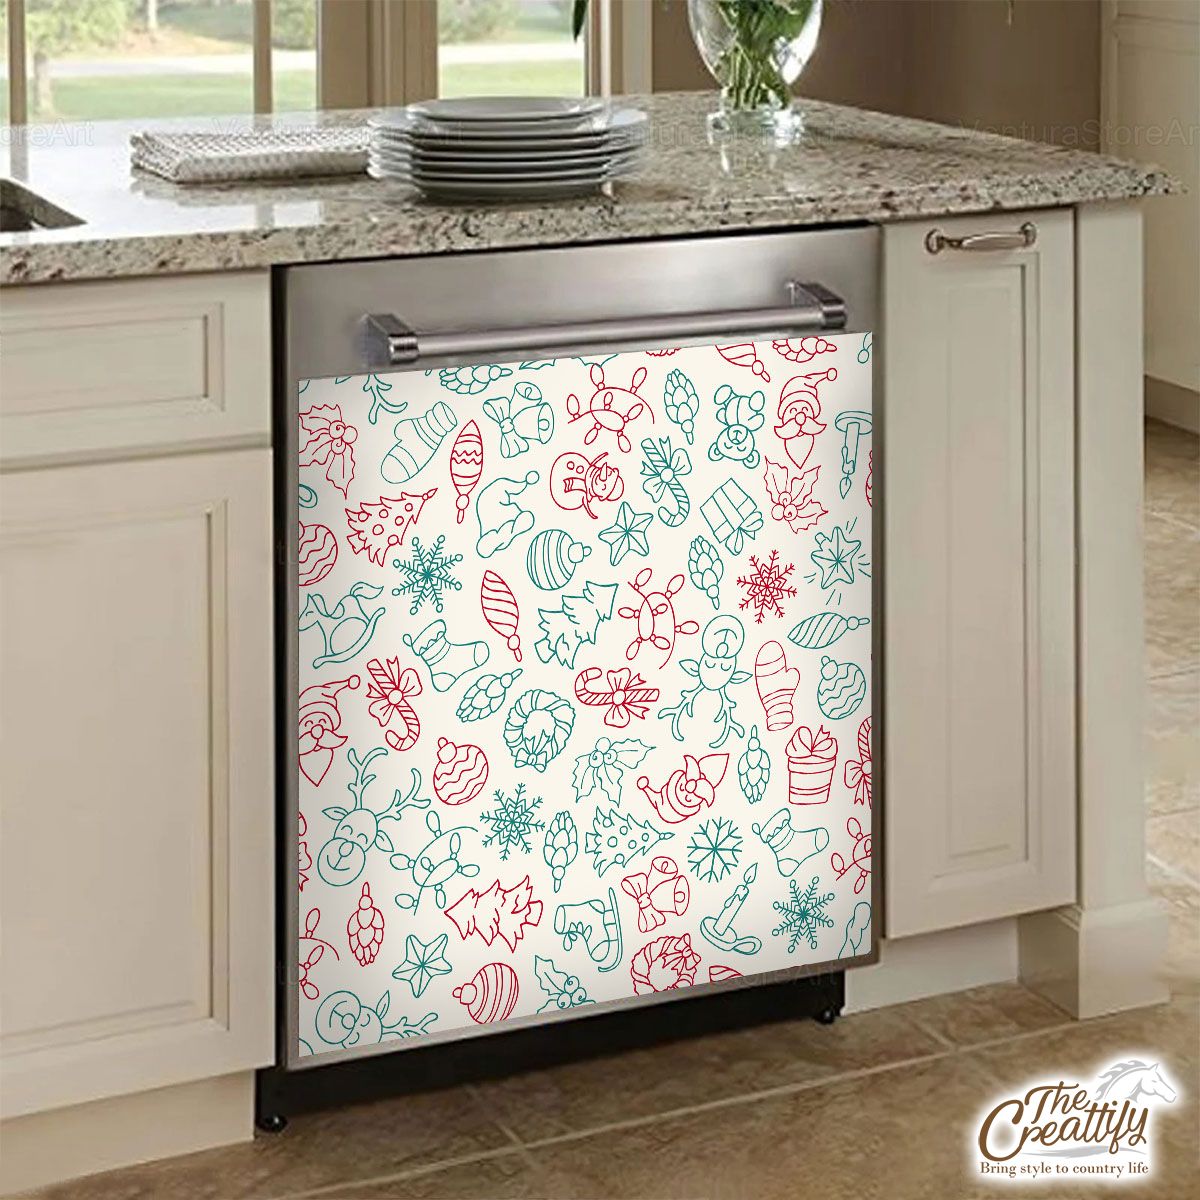 Snowflakes, Candy Cane, Baubles, Christmas Tree Pattern Dishwasher Cover